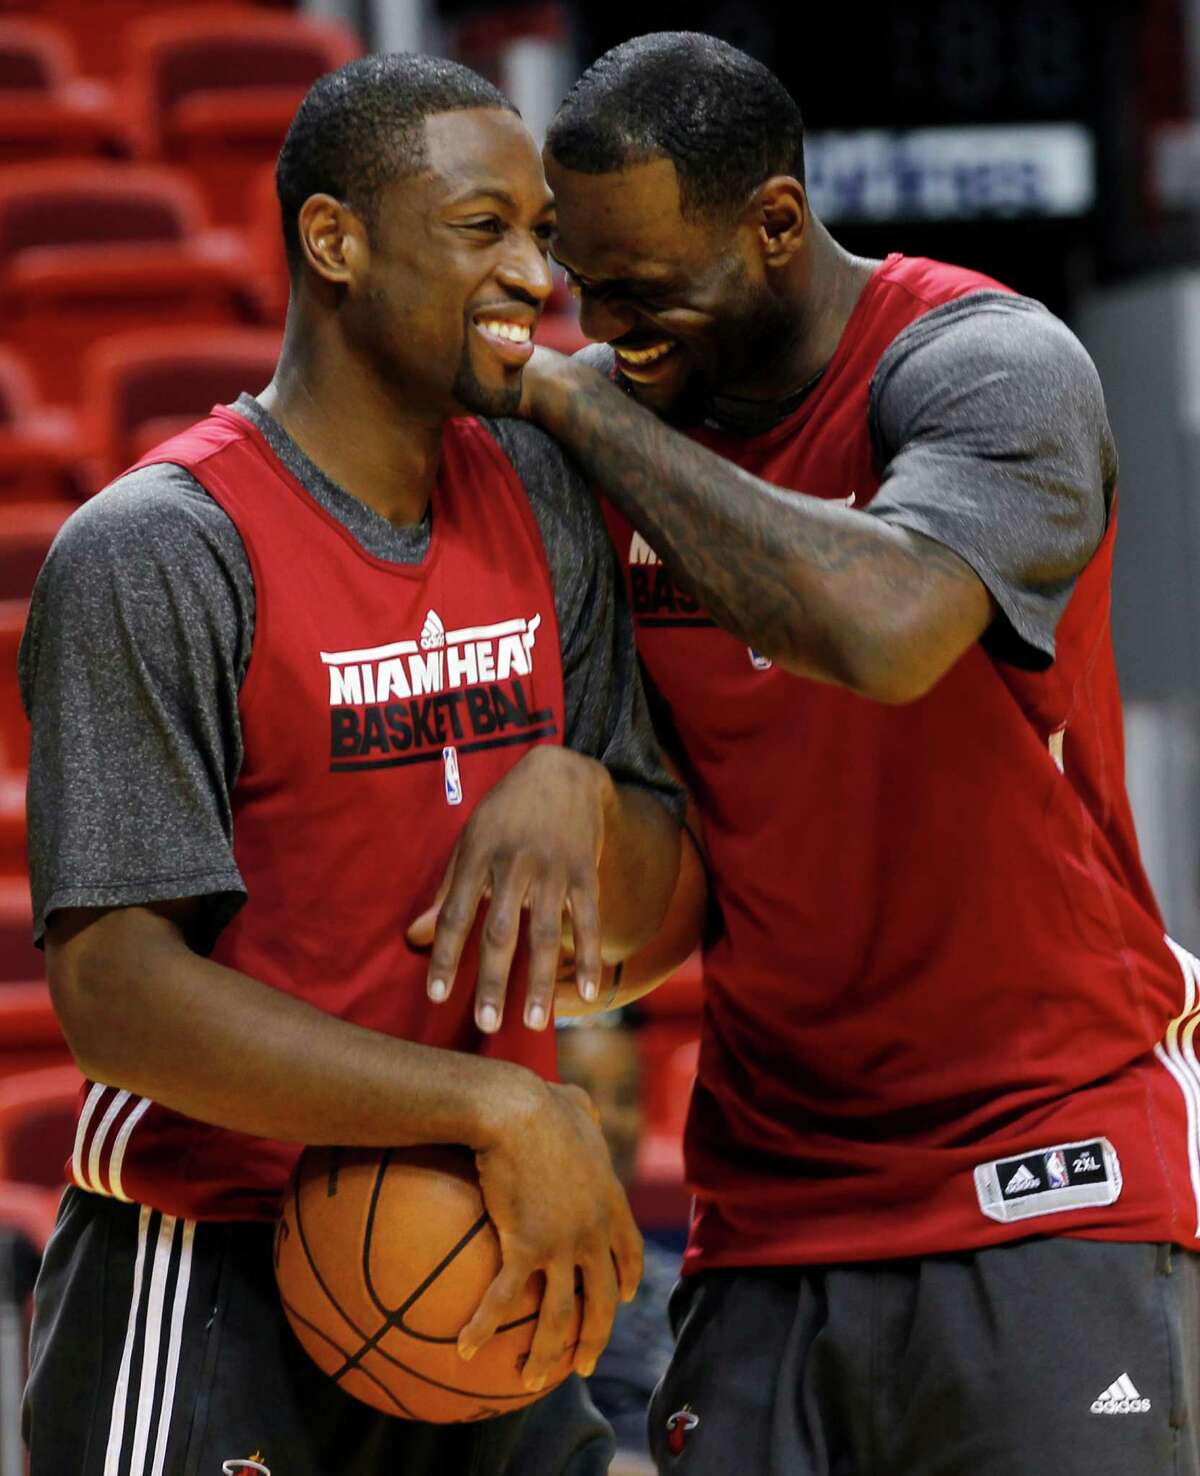 Miami Heat shooting guard Dwyane Wade, left, and small forward LeBron James share a laugh during practice, Monday, June 18, 2012, in Miami. The Heat play the Oklahoma City Thunder in Game 4 of the NBA basketball finals on Tuesday. (AP Photo/Alan Diaz)